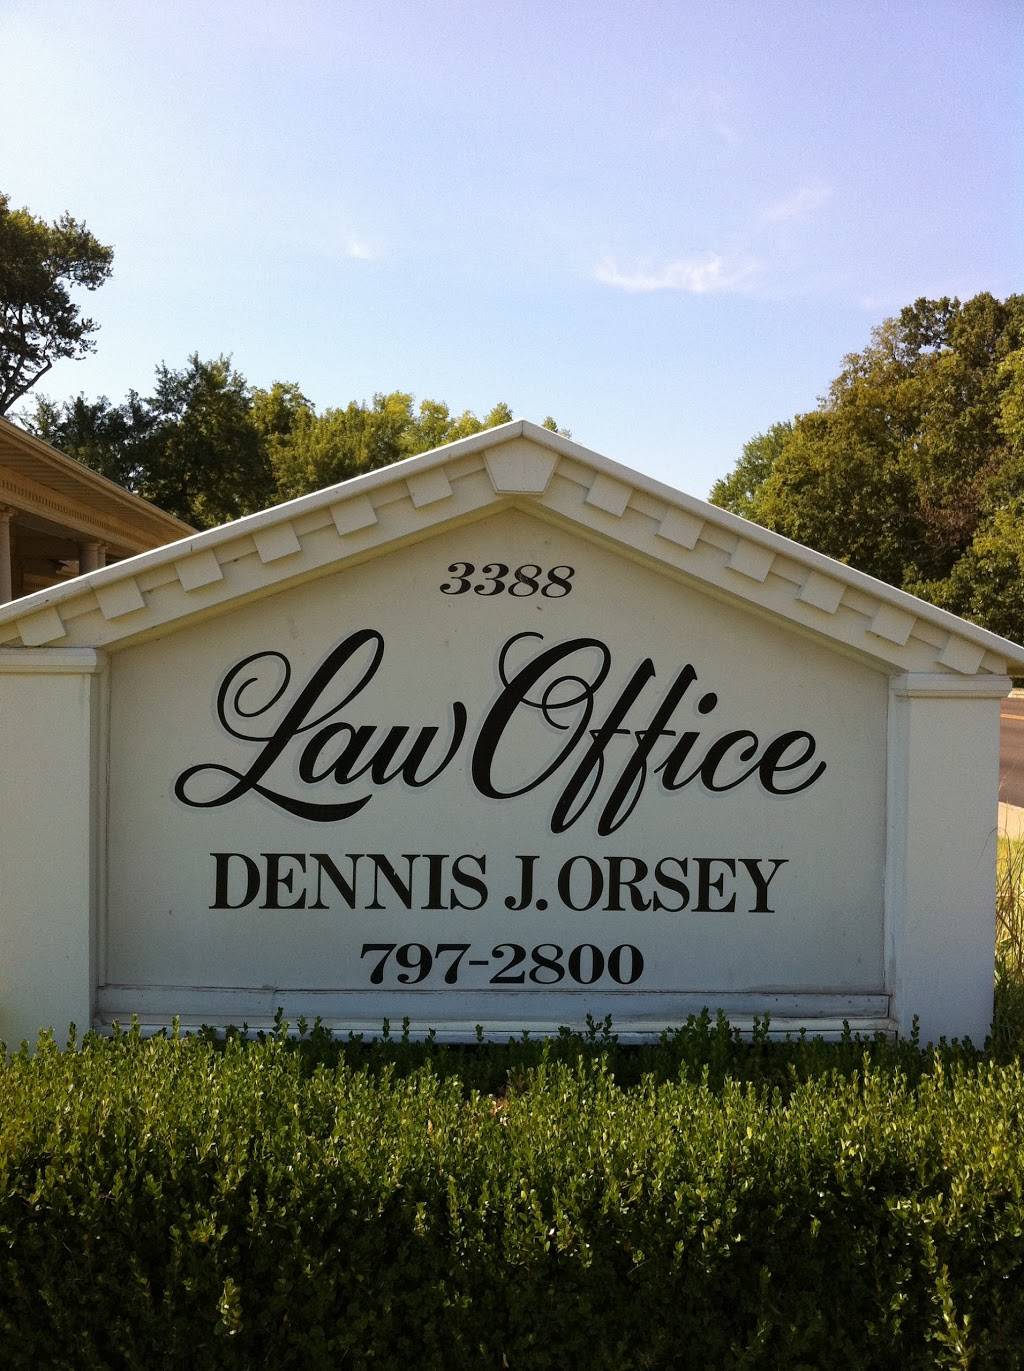 Dennis J Orsey Law Offices: Orsey Dennis J | 3388 Maryville Rd # A, Granite City, IL 62040 | Phone: (618) 797-2800